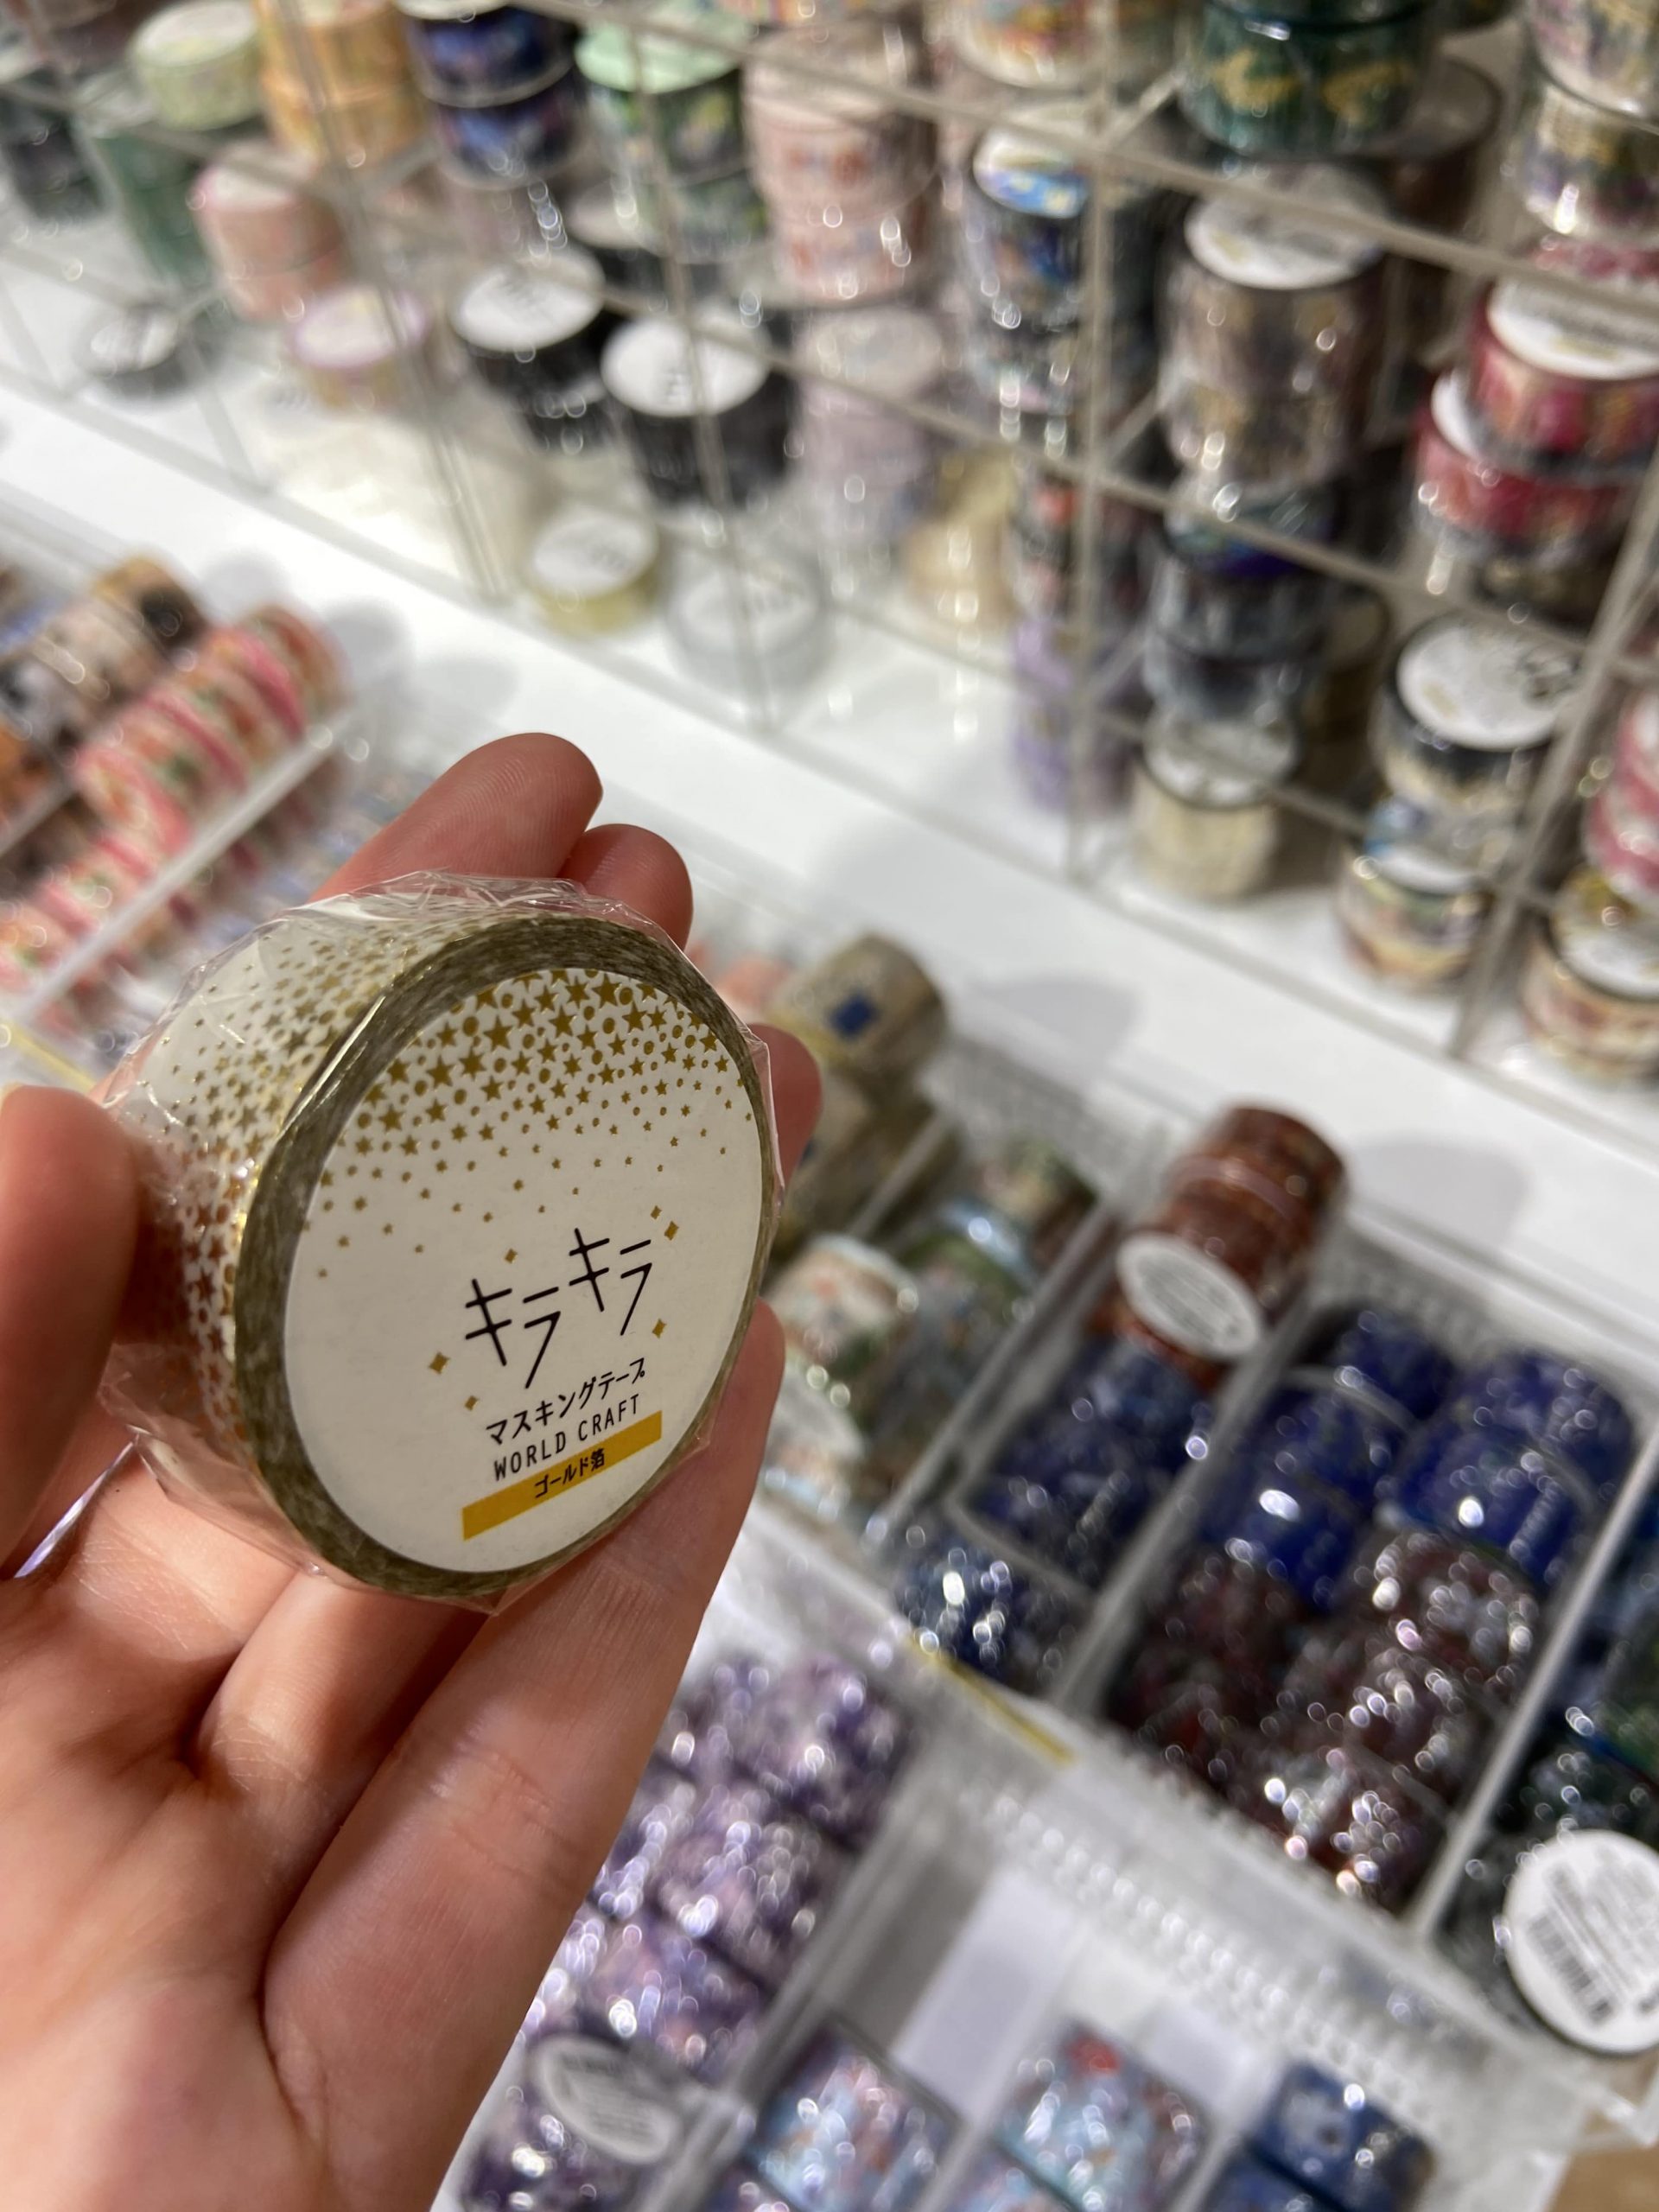 loft osaka japan planner supplies where to buy washi tape decorative 10mm mt lab stockist where to buy japanese stationery